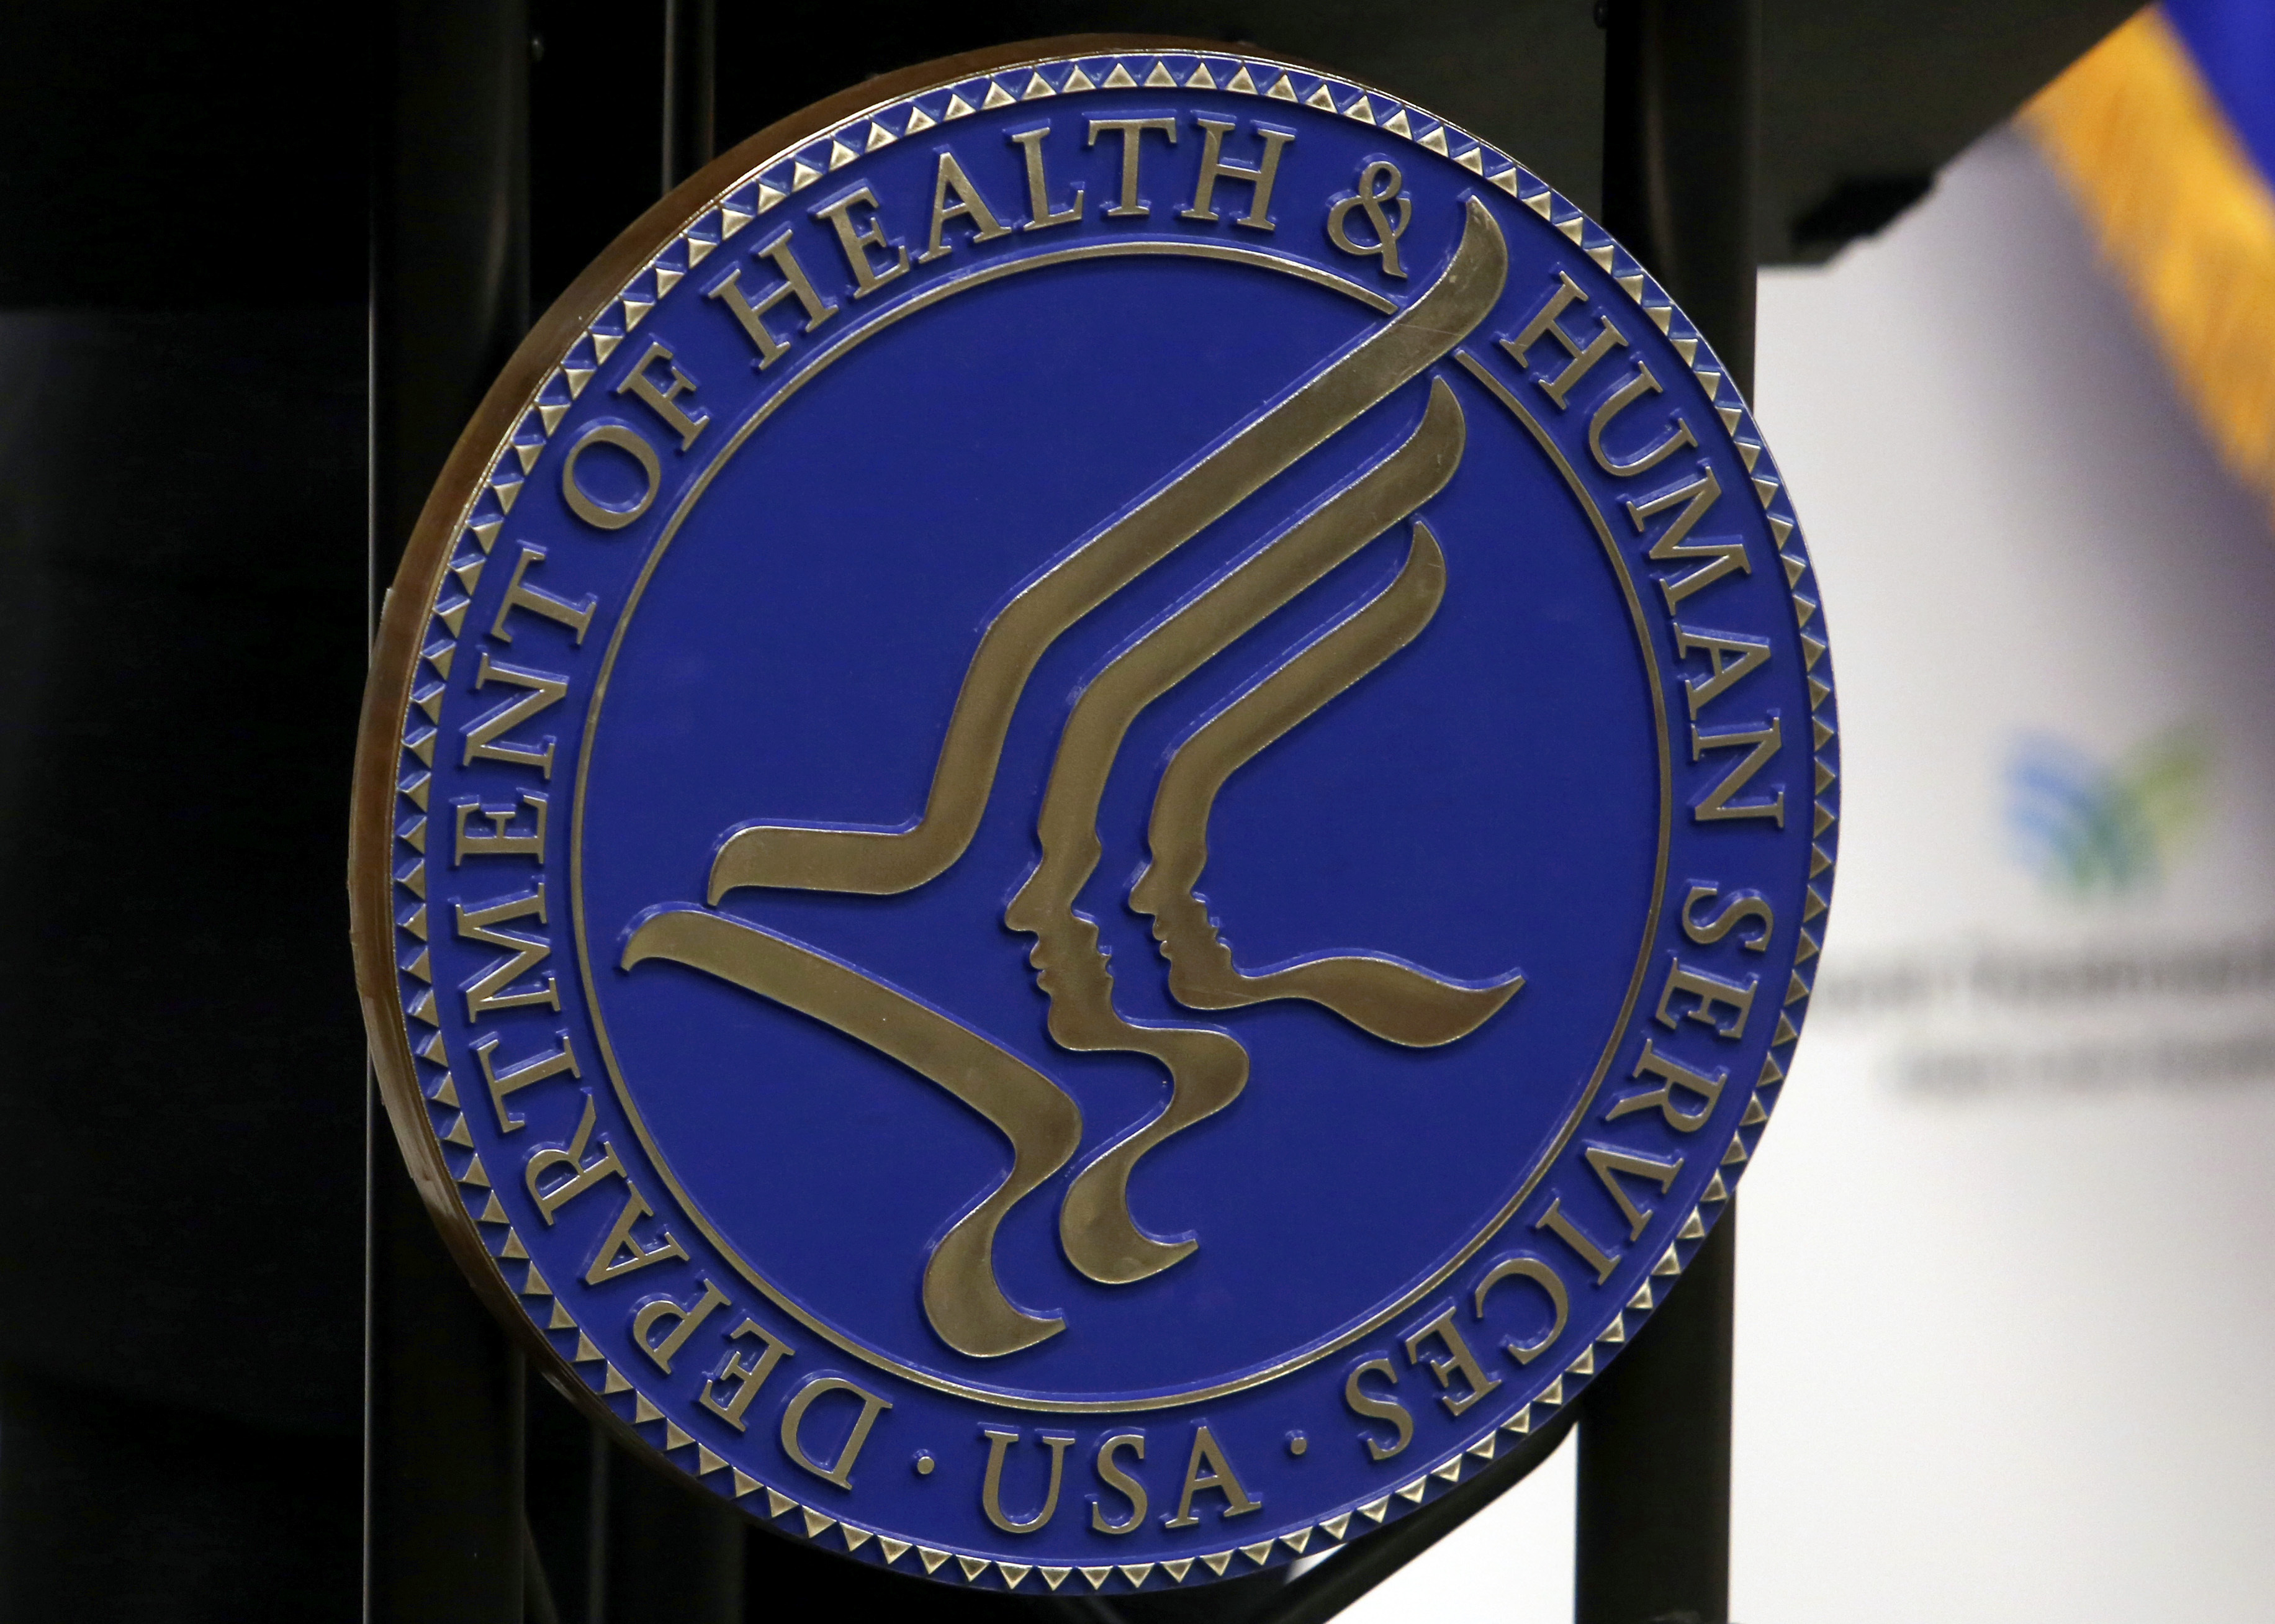 FILE - A U.S. Department of Health and Human Services (HHS) seal is affixed to a building in Media, Pennsylvania, on Sept. 15, 2017. (AP Photo/Jacqueline Larma, File)